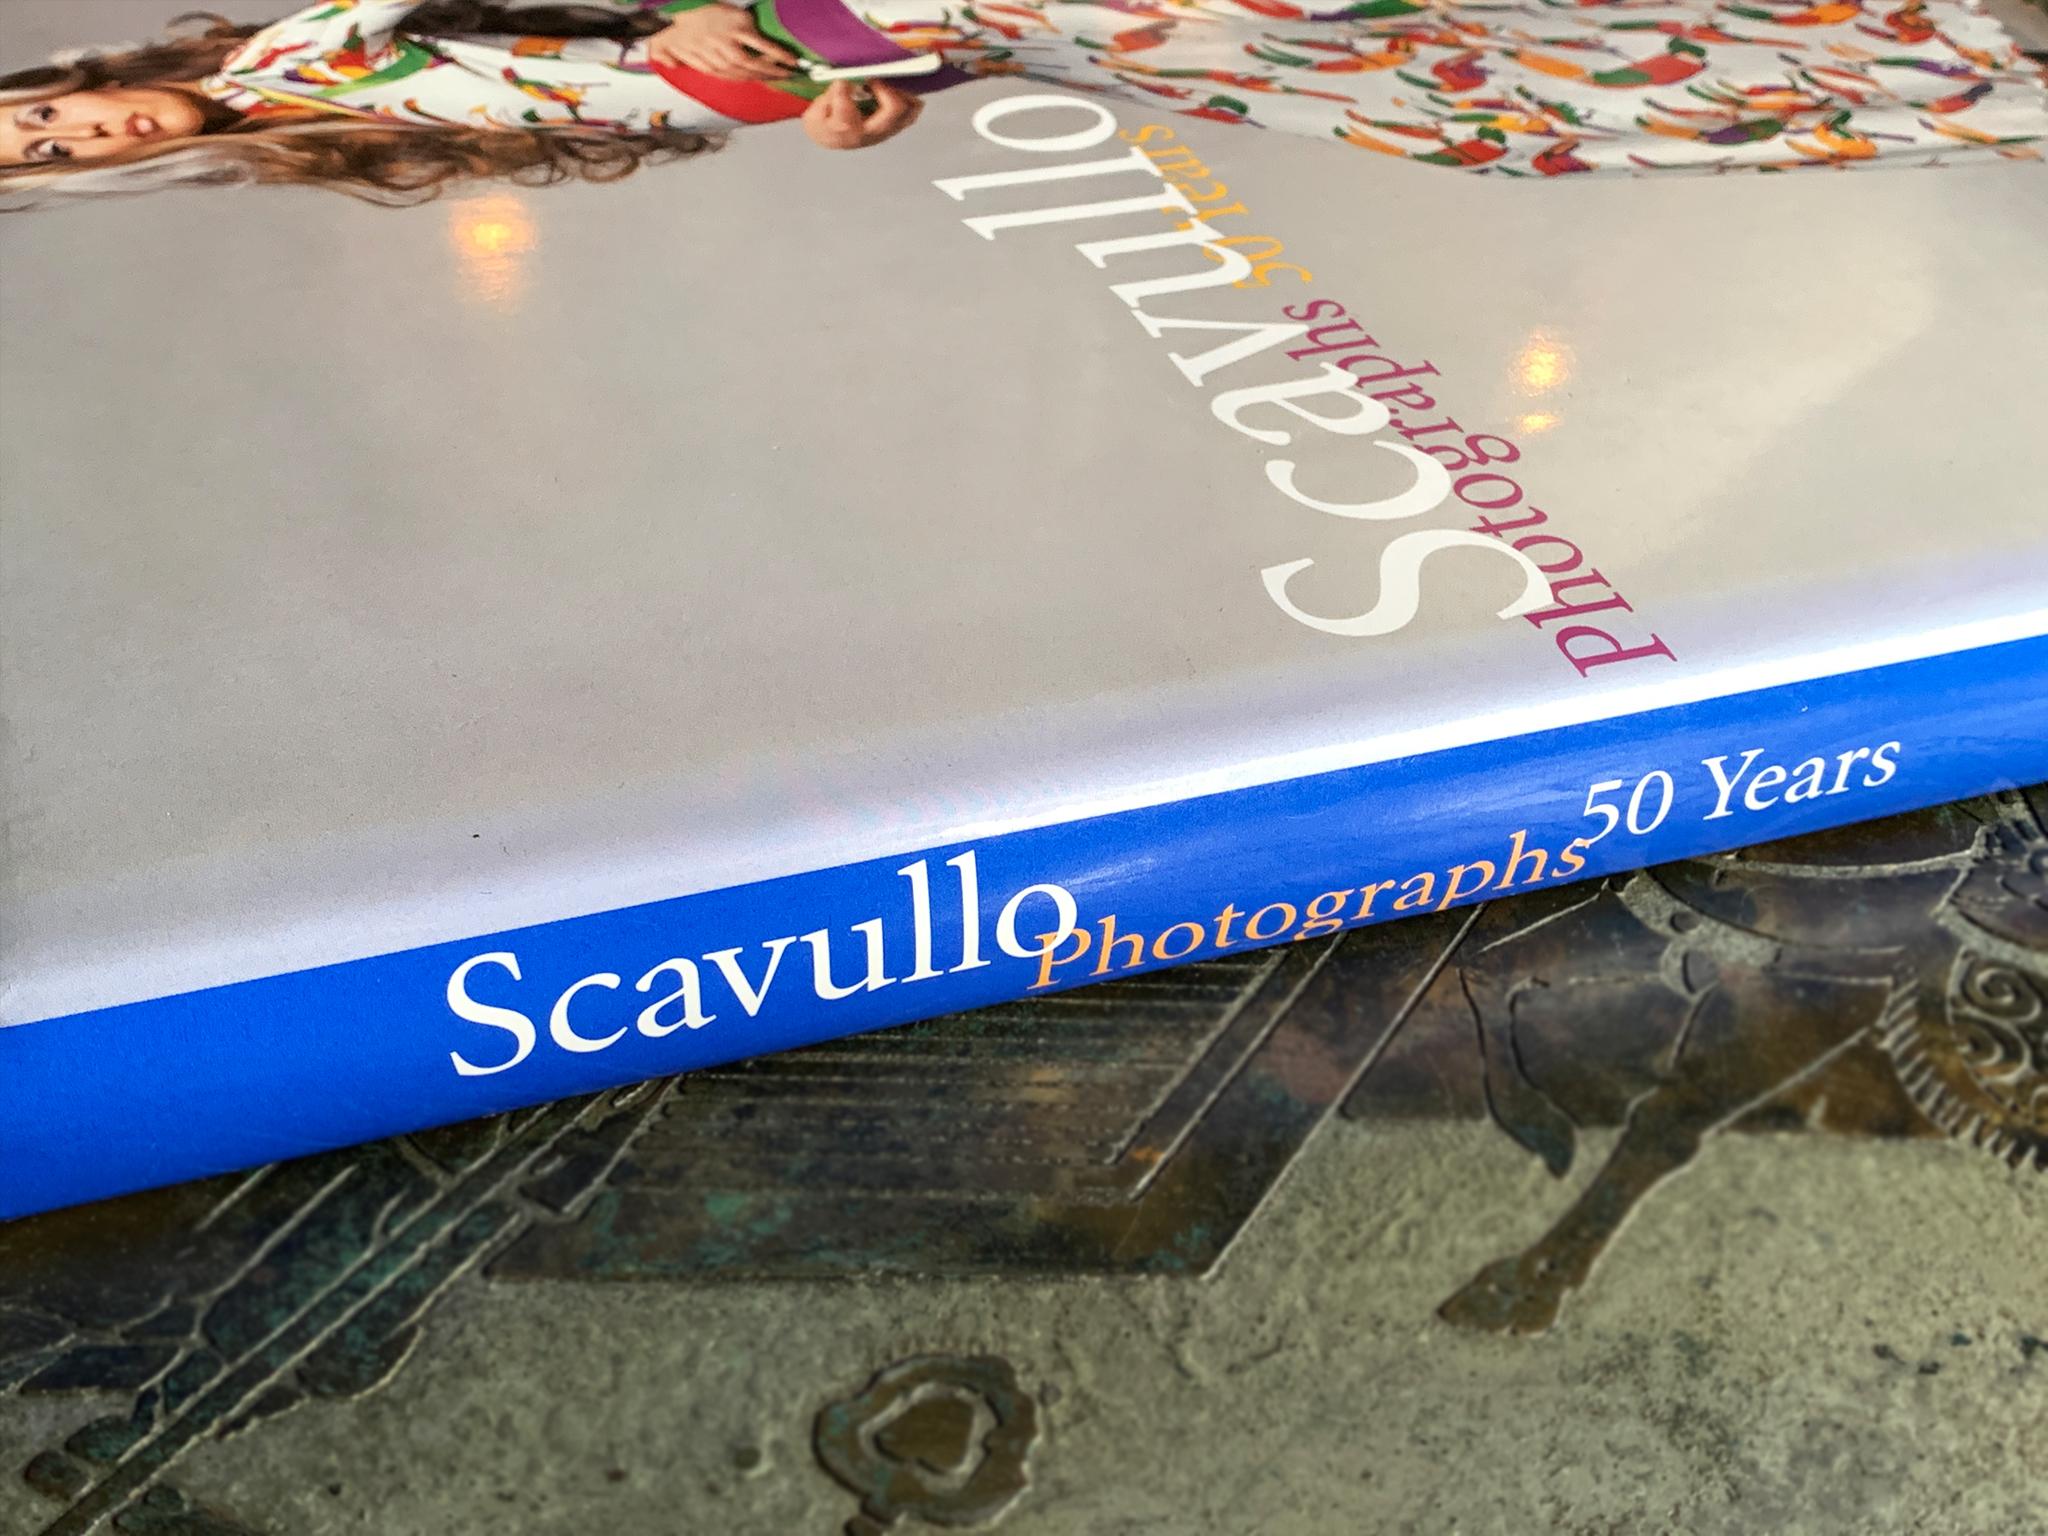 Paper Scavullo Photographs 50 Years For Sale